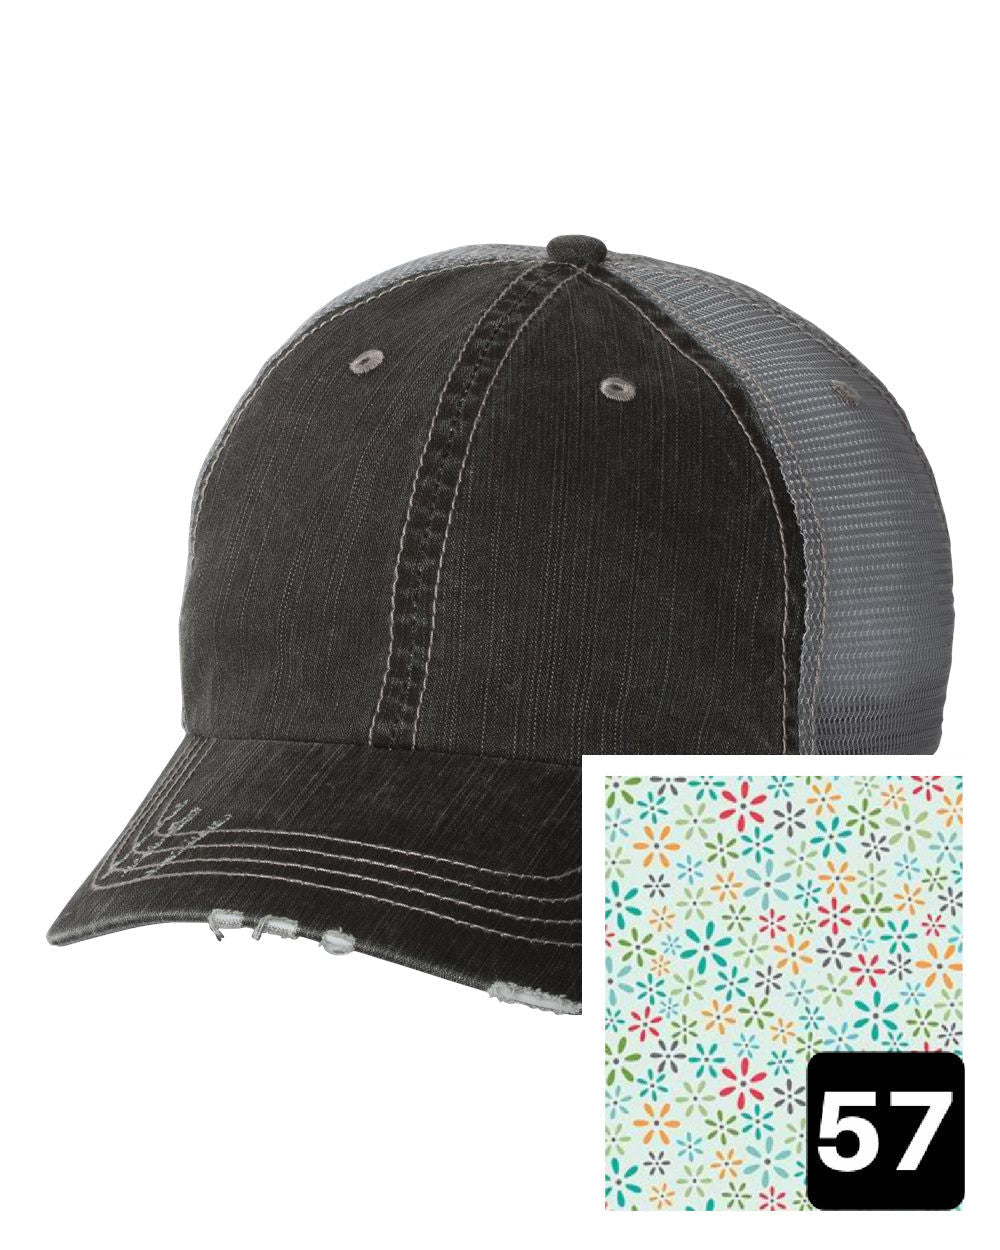 gray distressed trucker hat with white daisy on yellow fabric state of Missouri